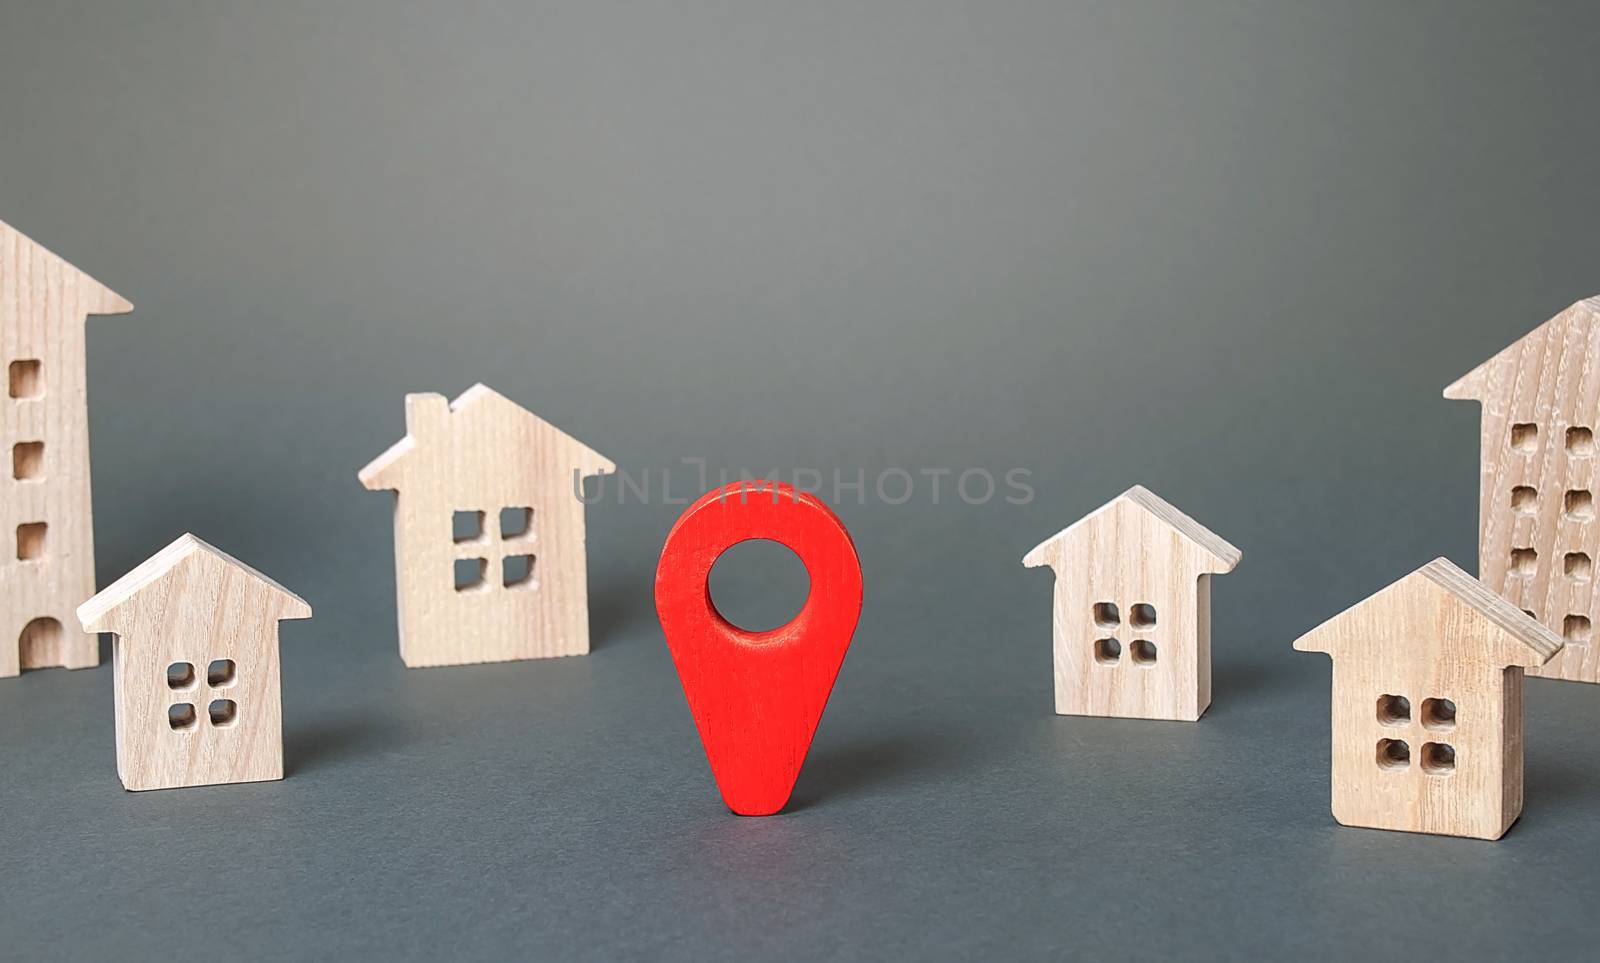 Red navigation pointer in a city town. Places and sights. Location routes. Travel, choosing a new place options of residence. Holidays, festivals events. Assessment of infrastructure and environment. by iLixe48